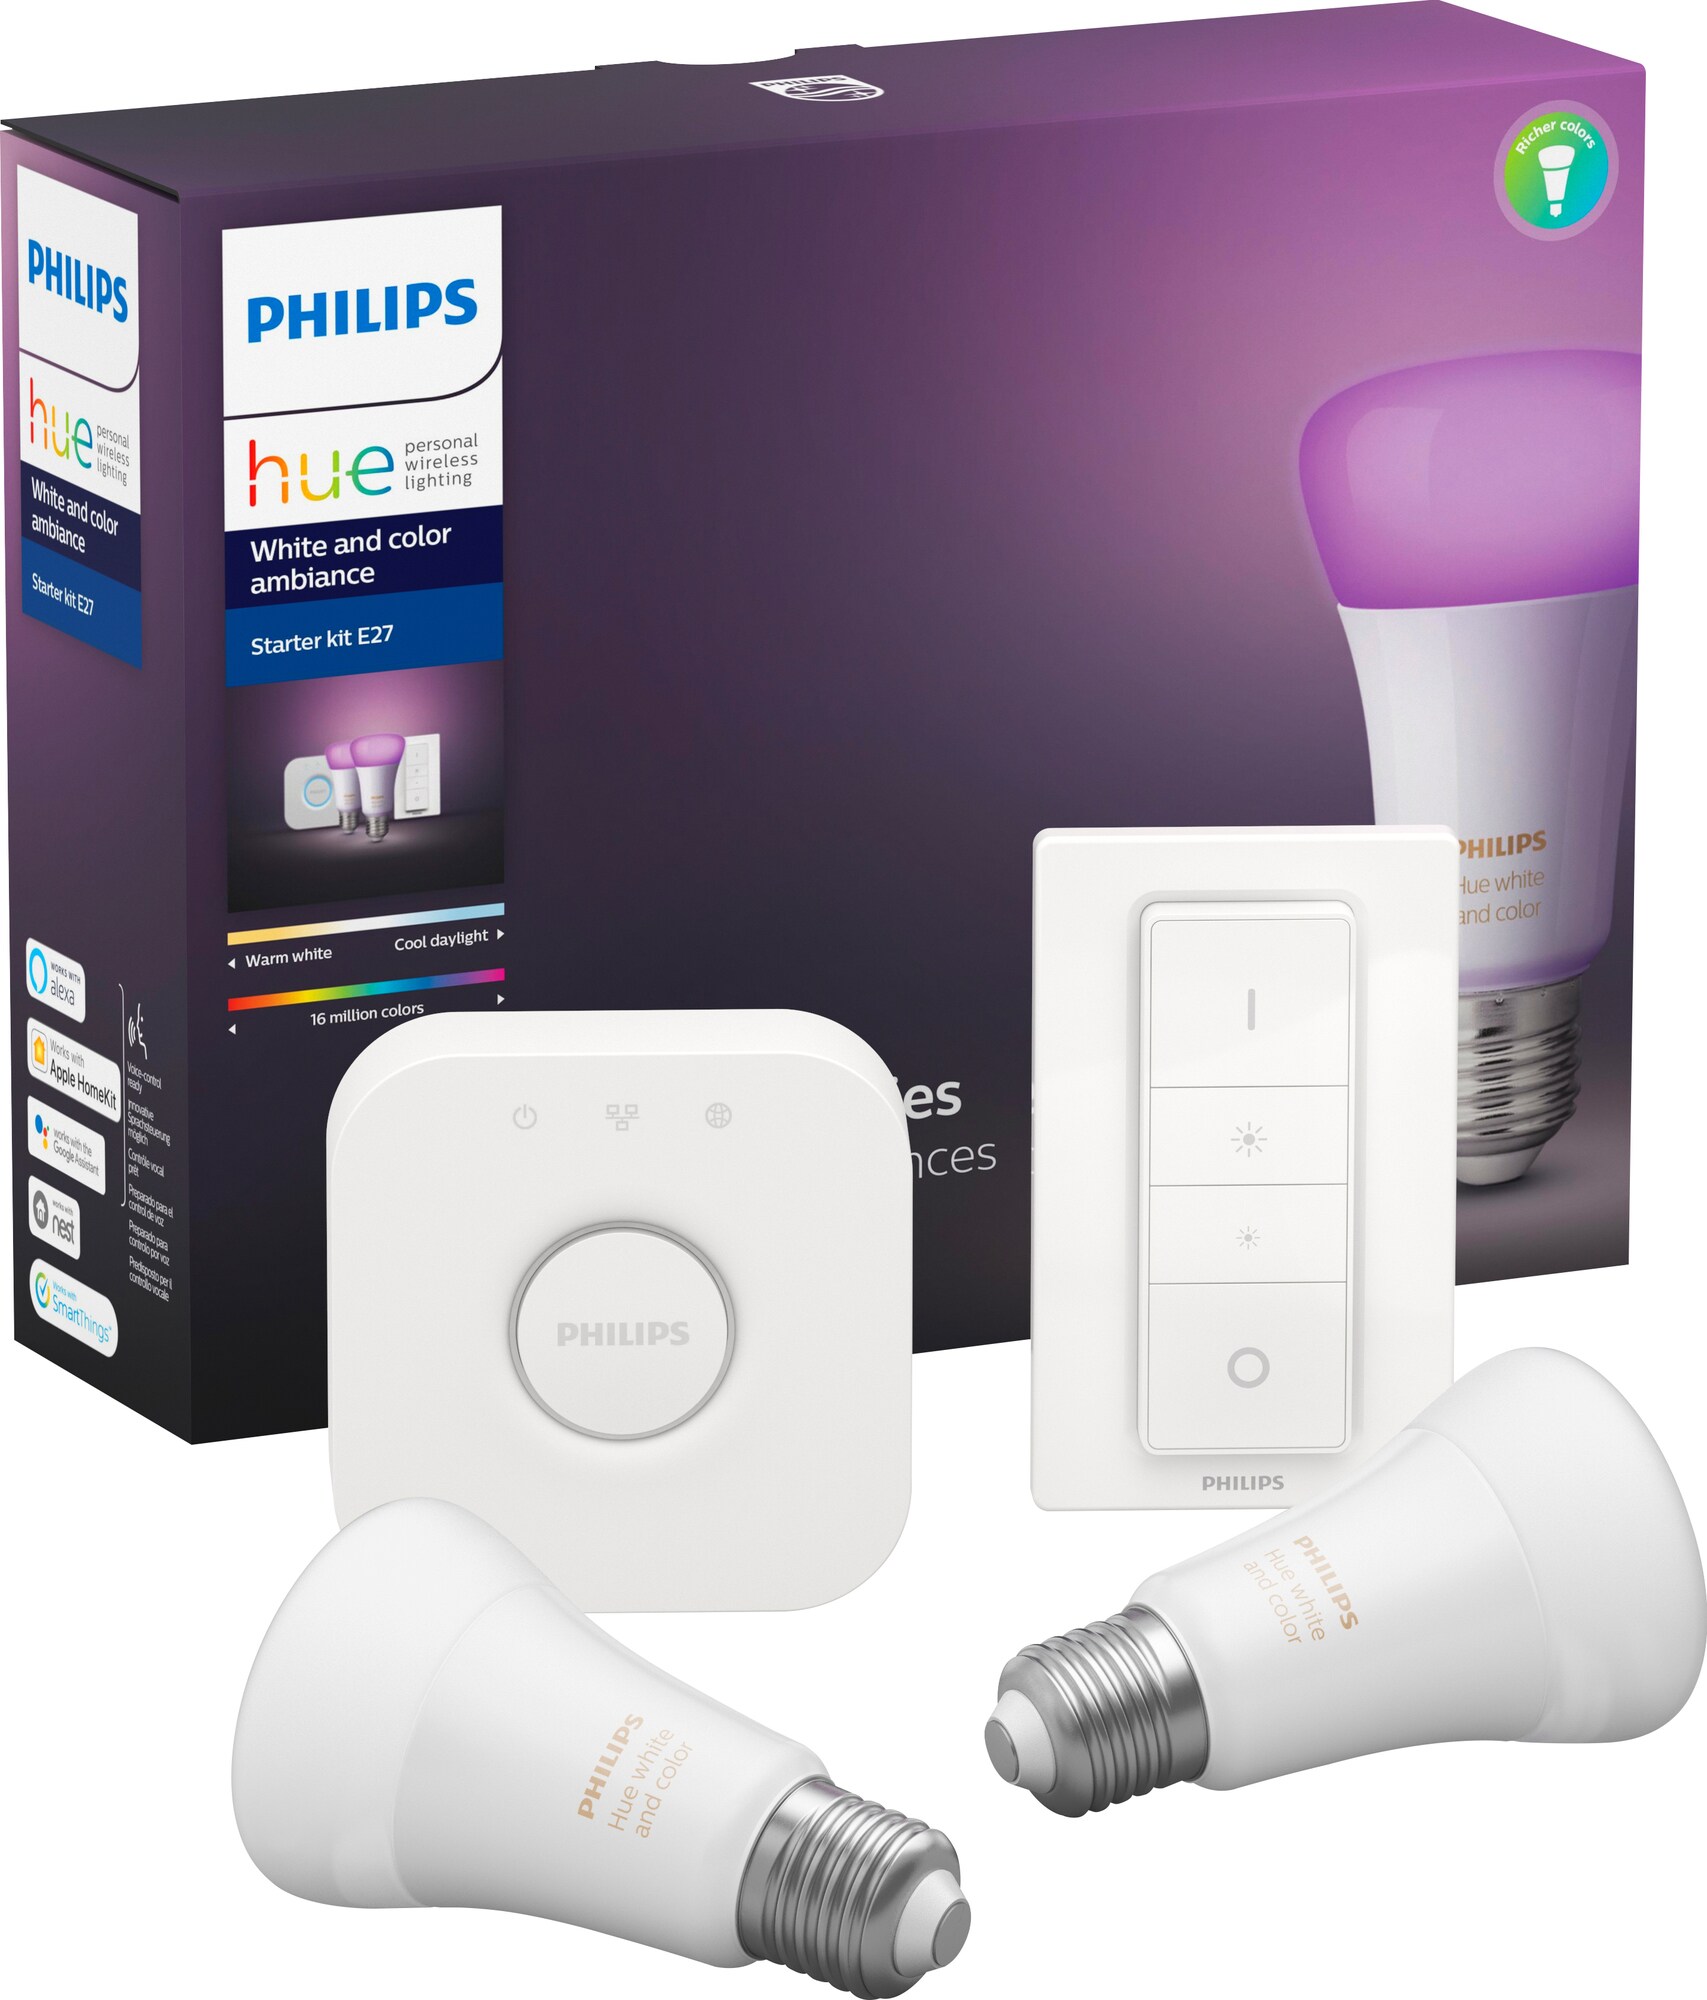 Philips Hue White and Color Ambiance startpakke 8718699701352 ...